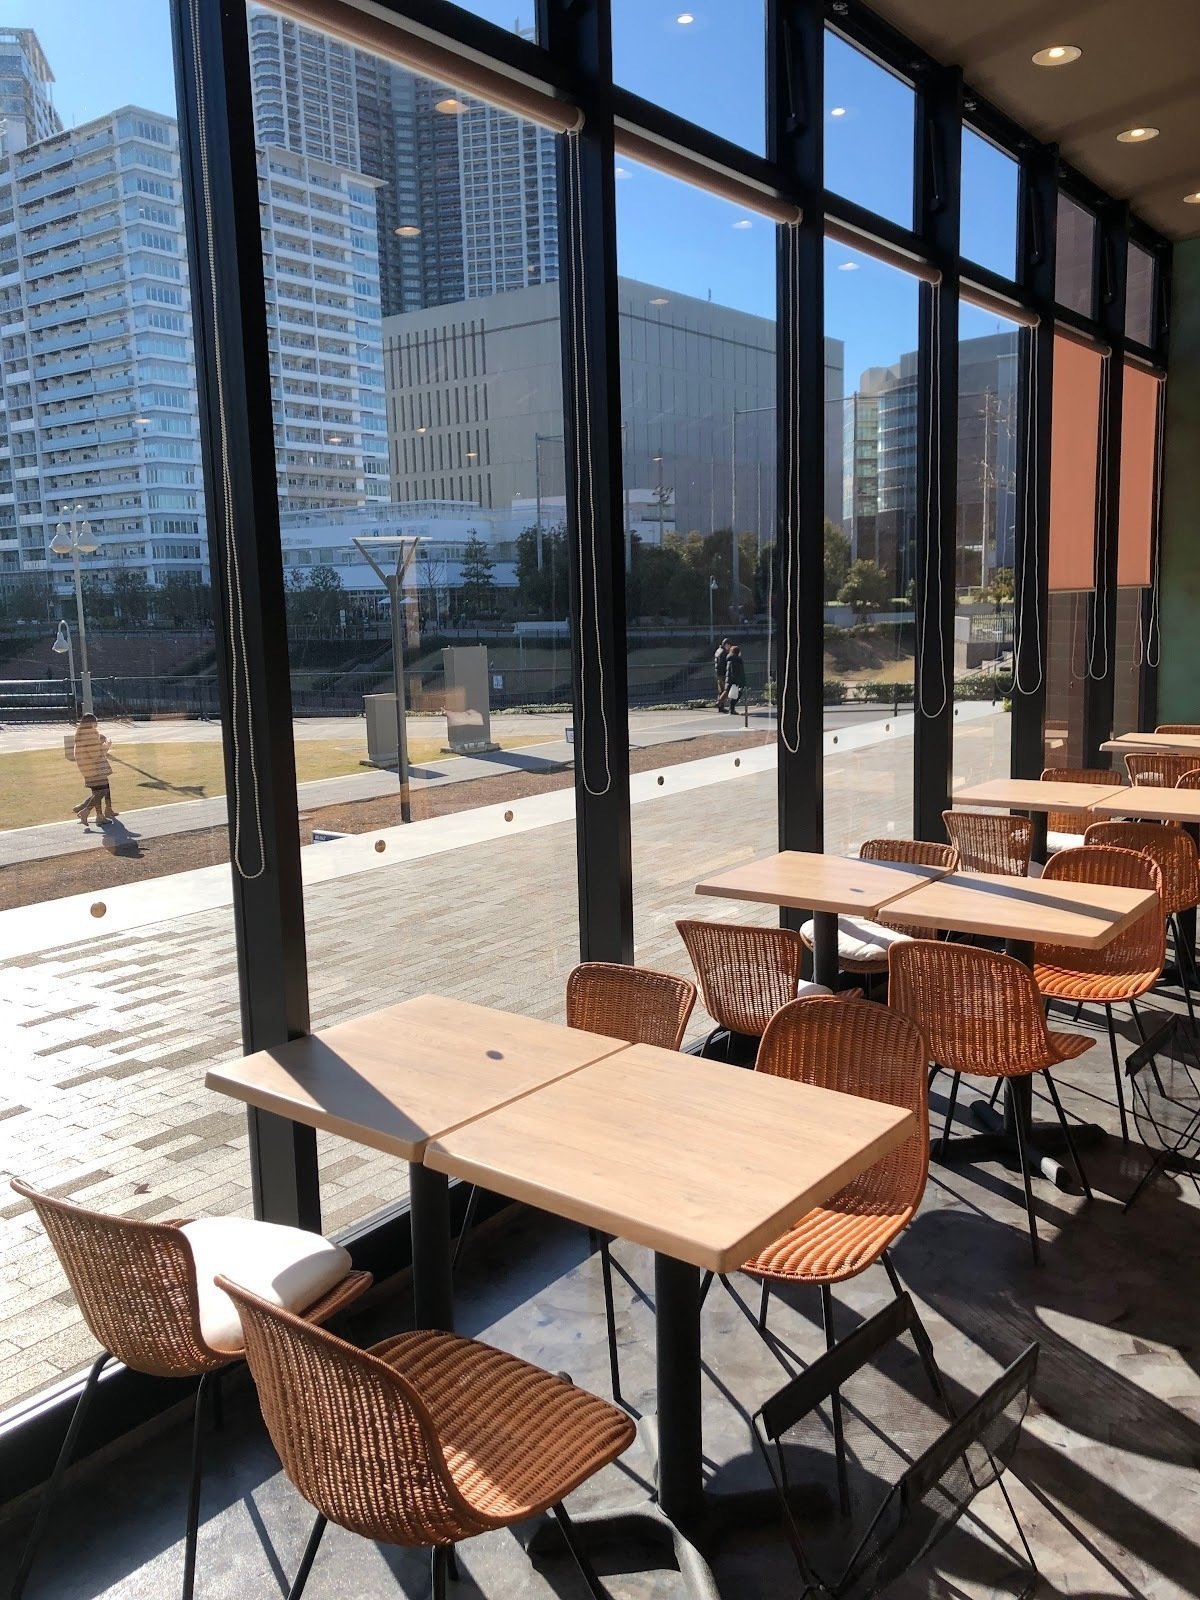 <span class="translation_missing" title="translation missing: en.meta.location_title, location_name: 新豊洲カフェ nacafe, city: Tokyo">Location Title</span>